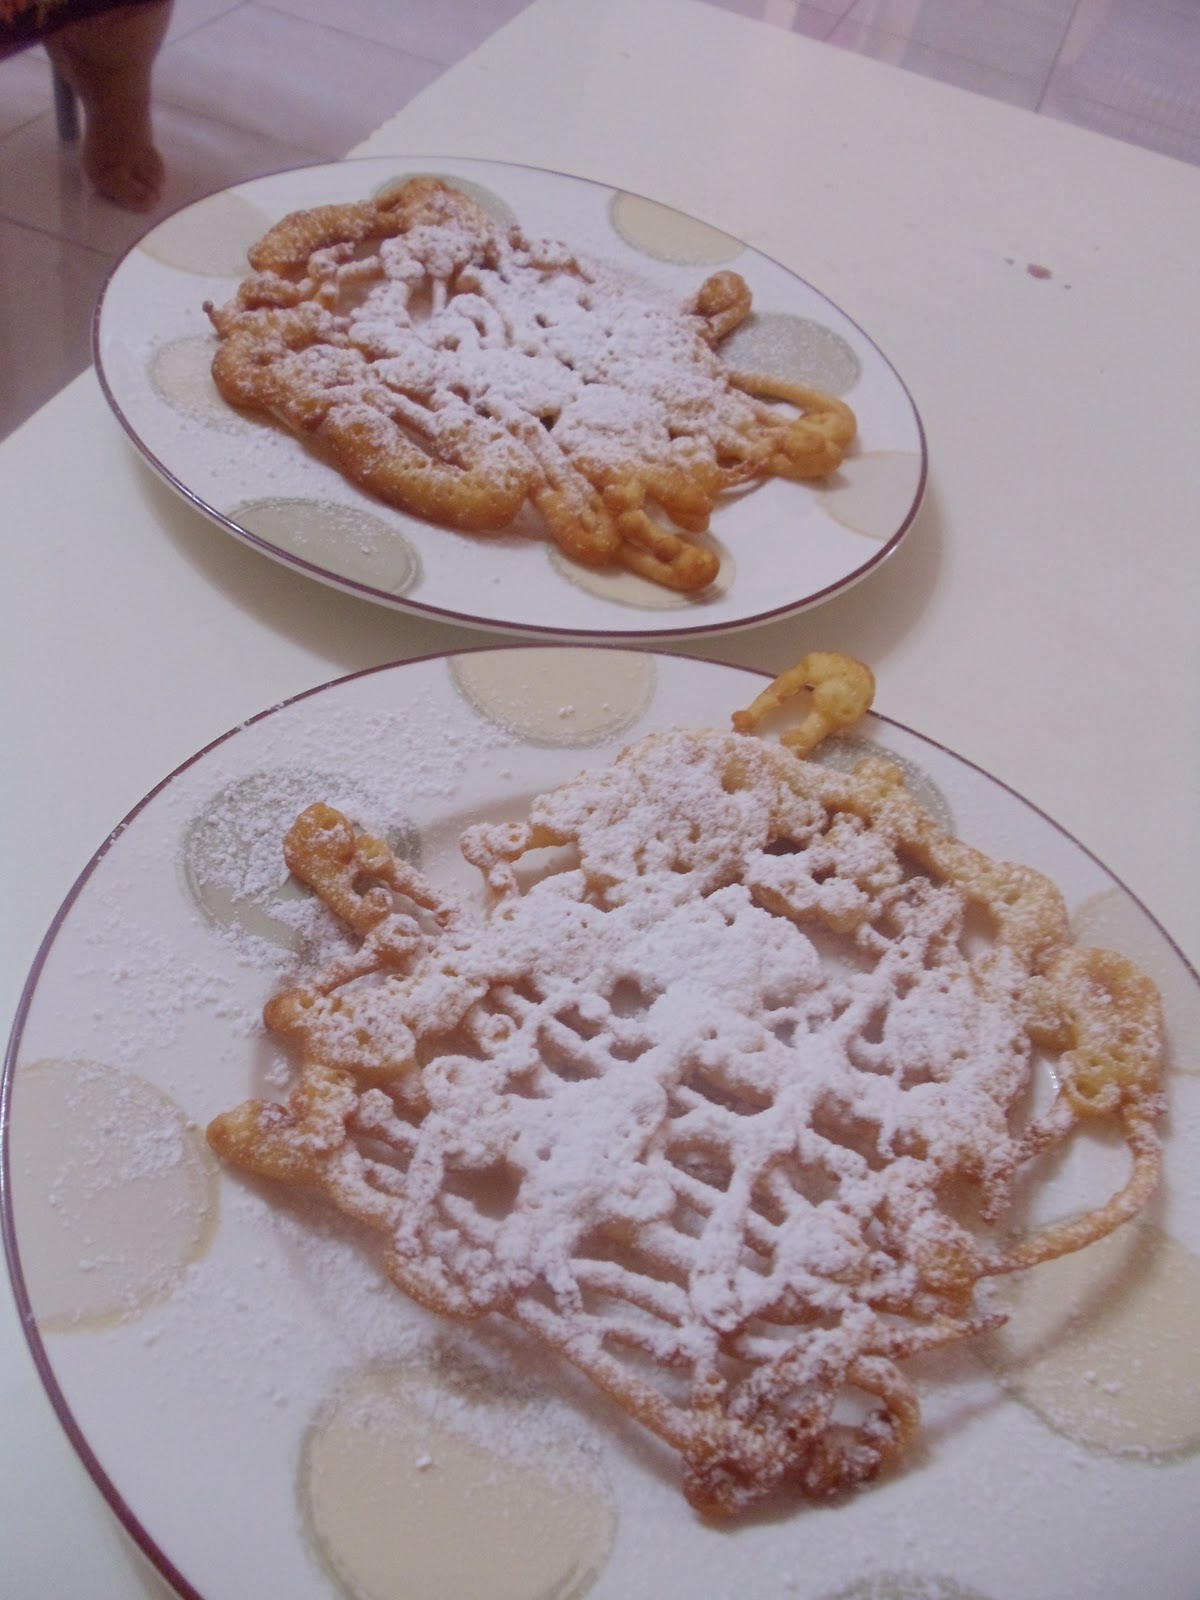 Made My Own Funnel Cake!